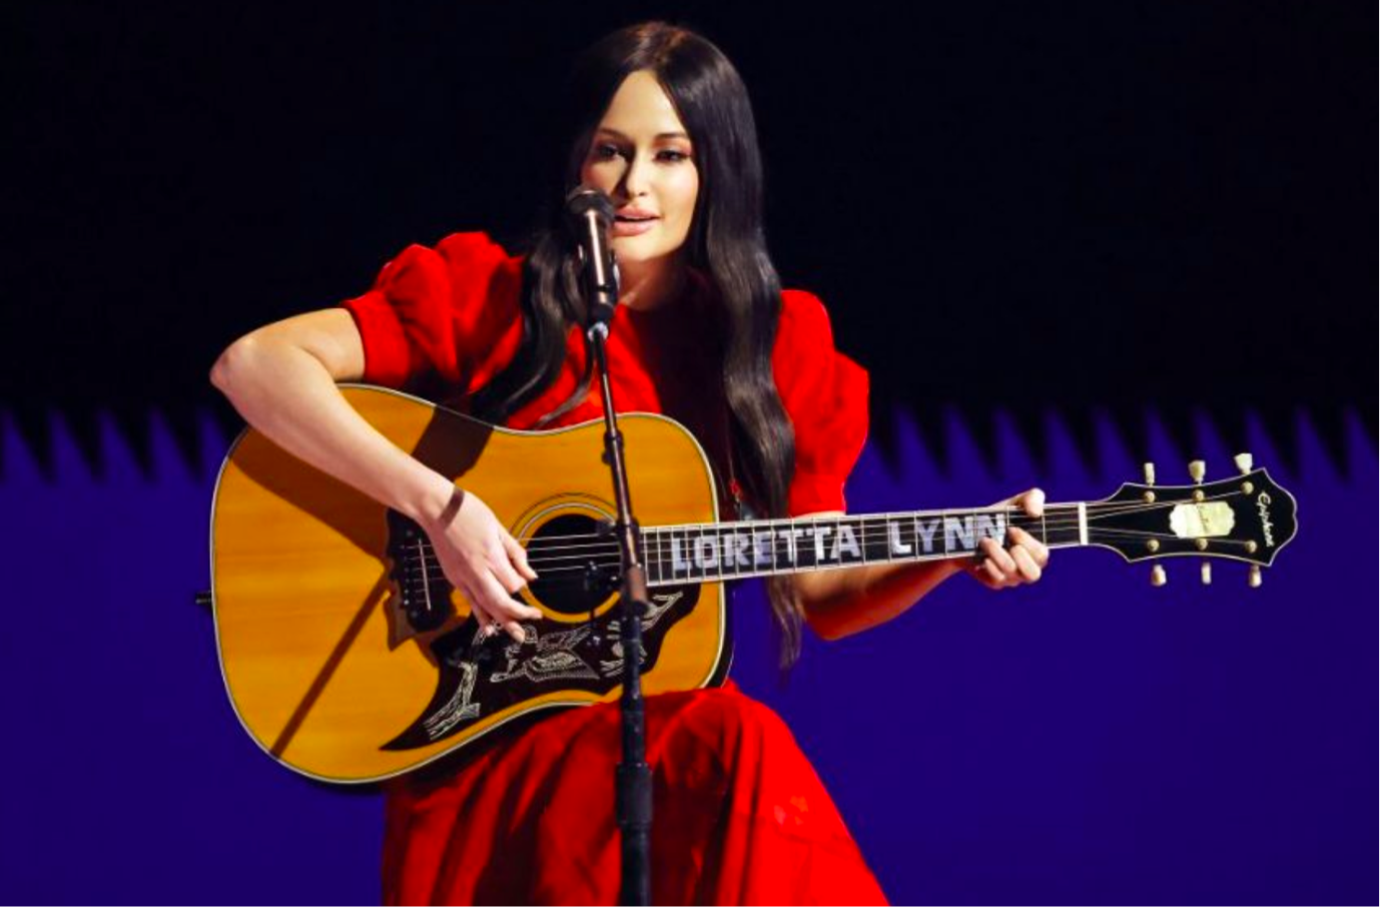 KACEY MUSGRAVES IN THE VAMPIRE’S WIFE